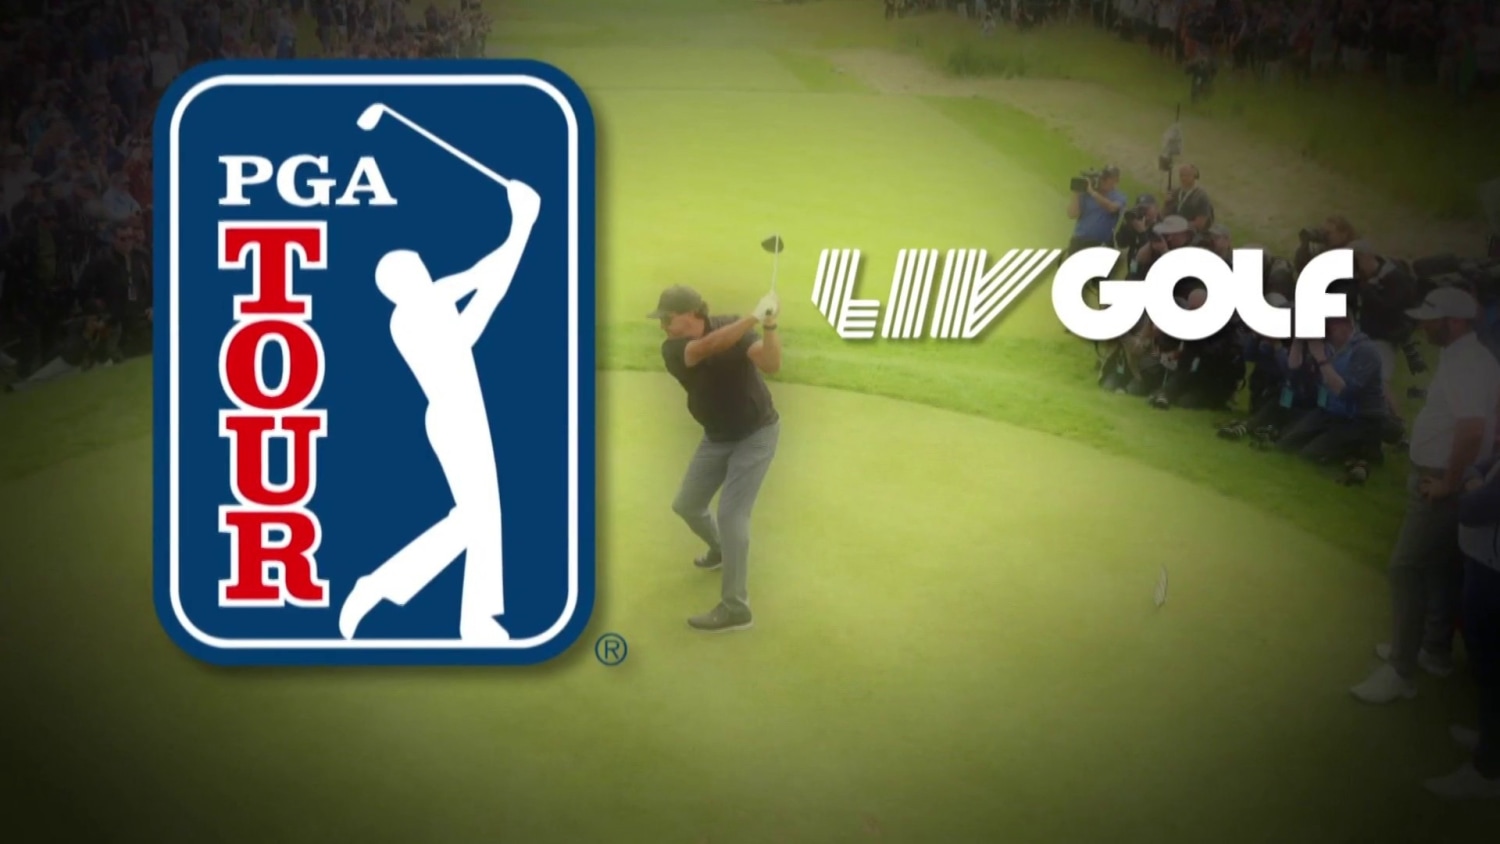 PGA Tour-LIV merger: What this new partnership means for the